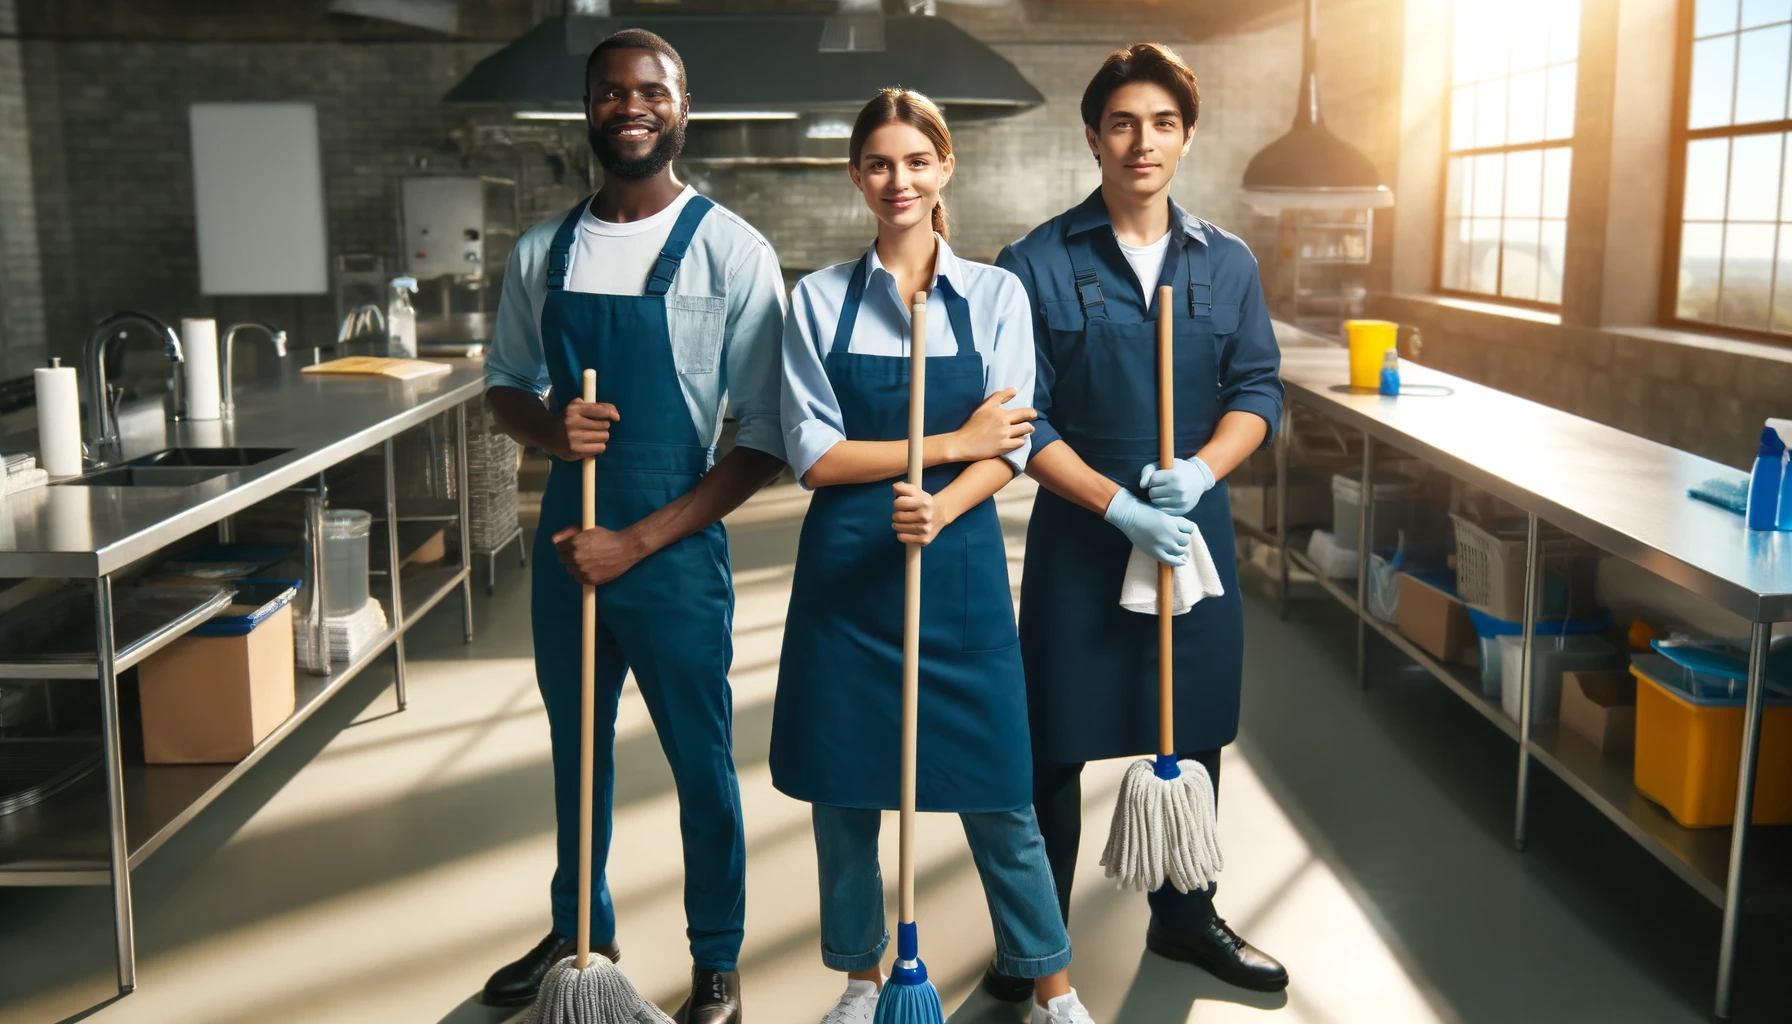 A diverse team of cleaning staff, including a Caucasian woman, an African man, and an Asian man, dressed in blue uniforms